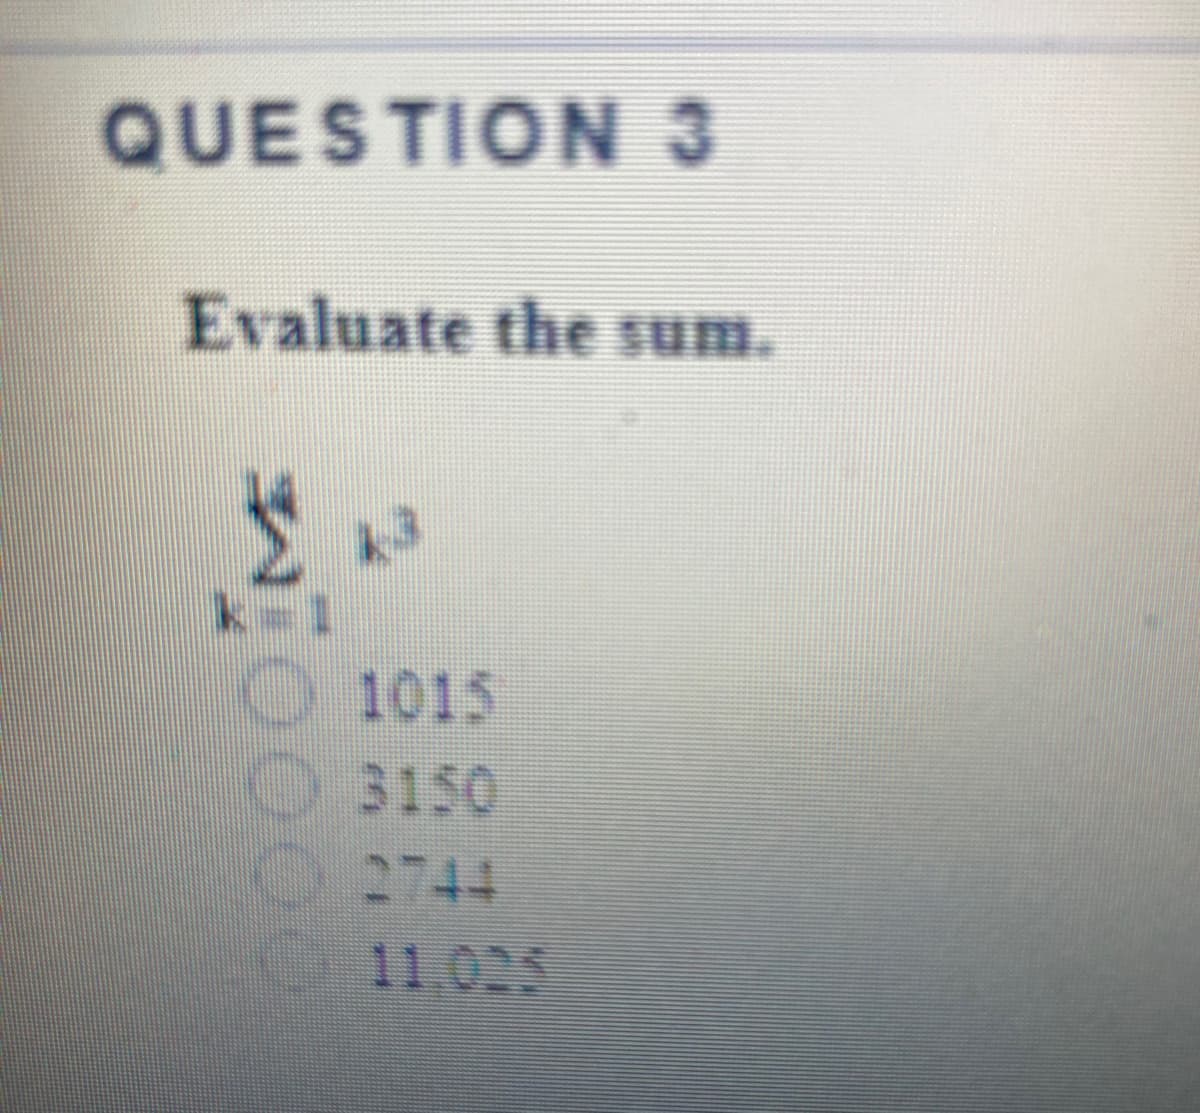 QUESTION 3
Evaluate the sum.
k=1
O1015
3150
2744
11.025
